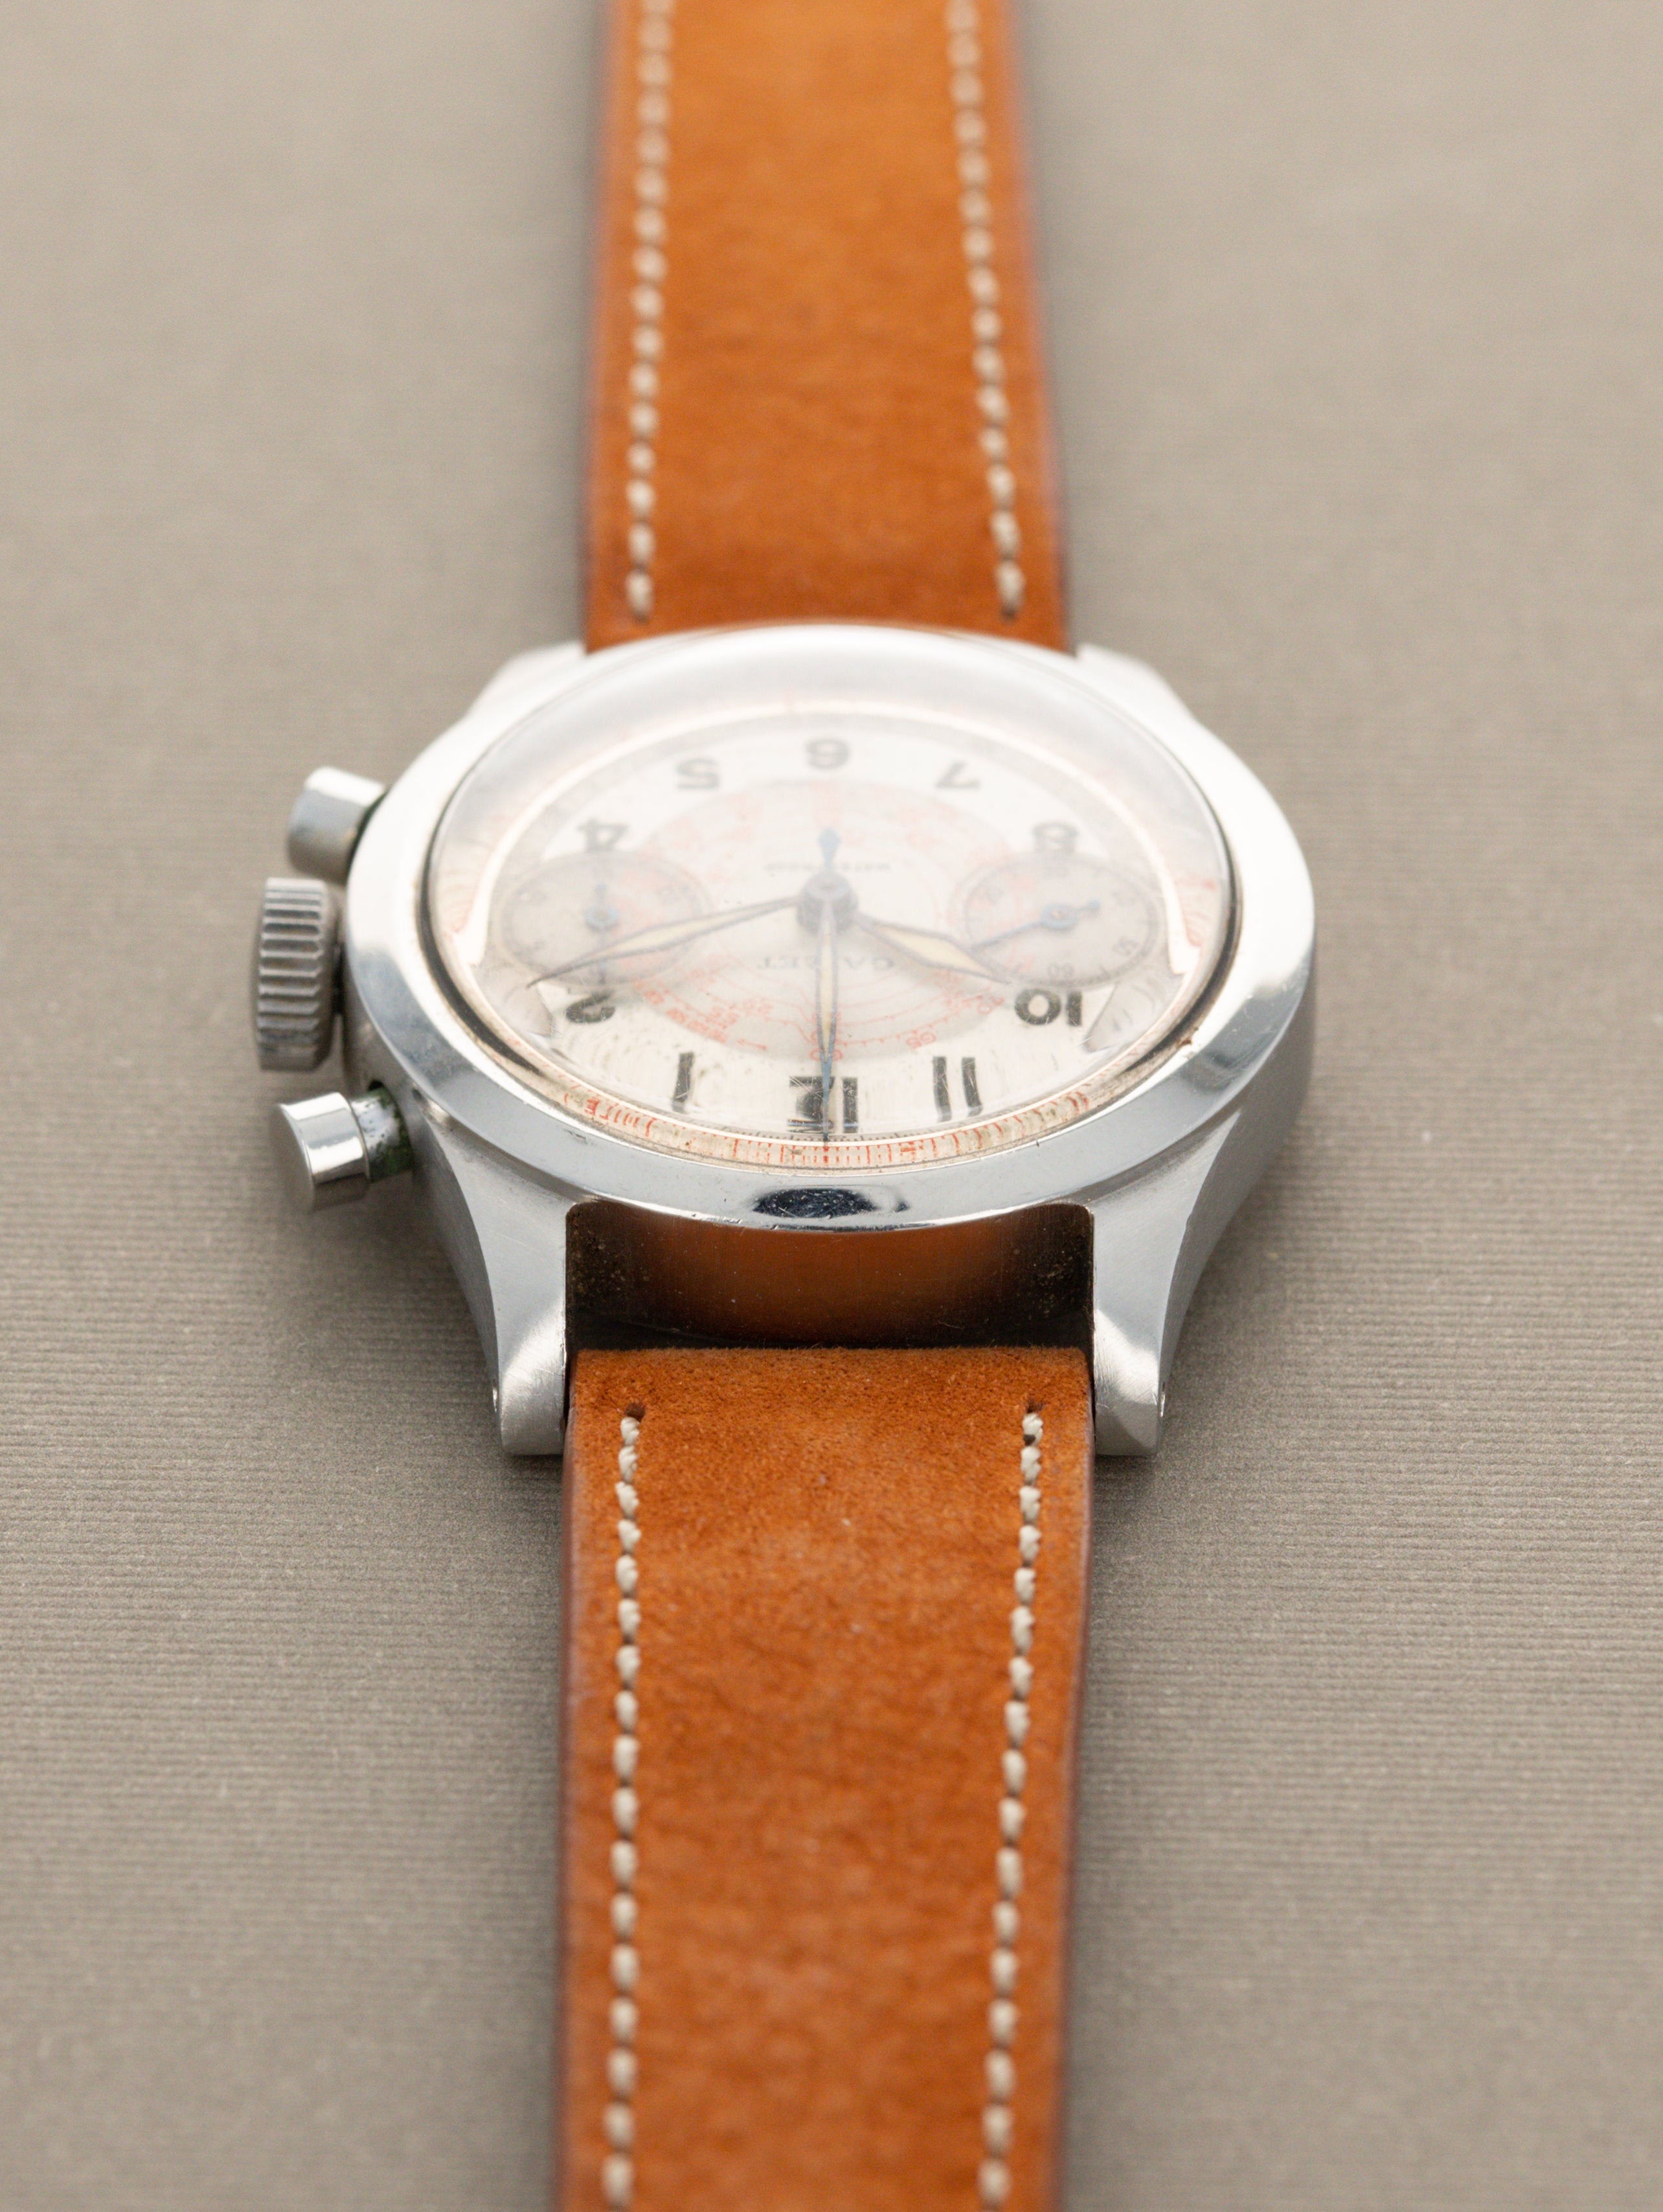 Gallet 30M Clamshell Case Chronograph